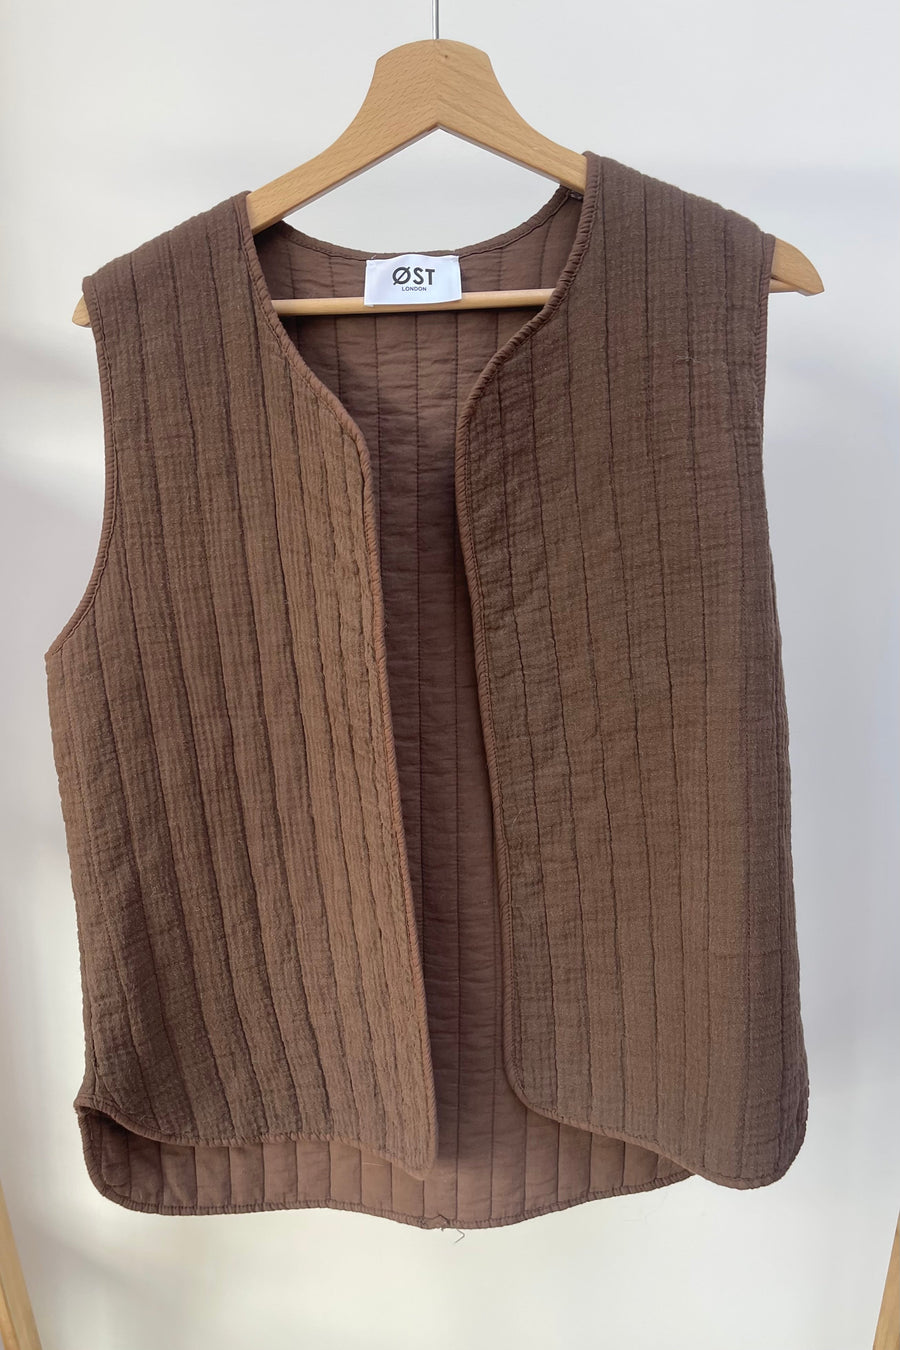 Brown quilted vest